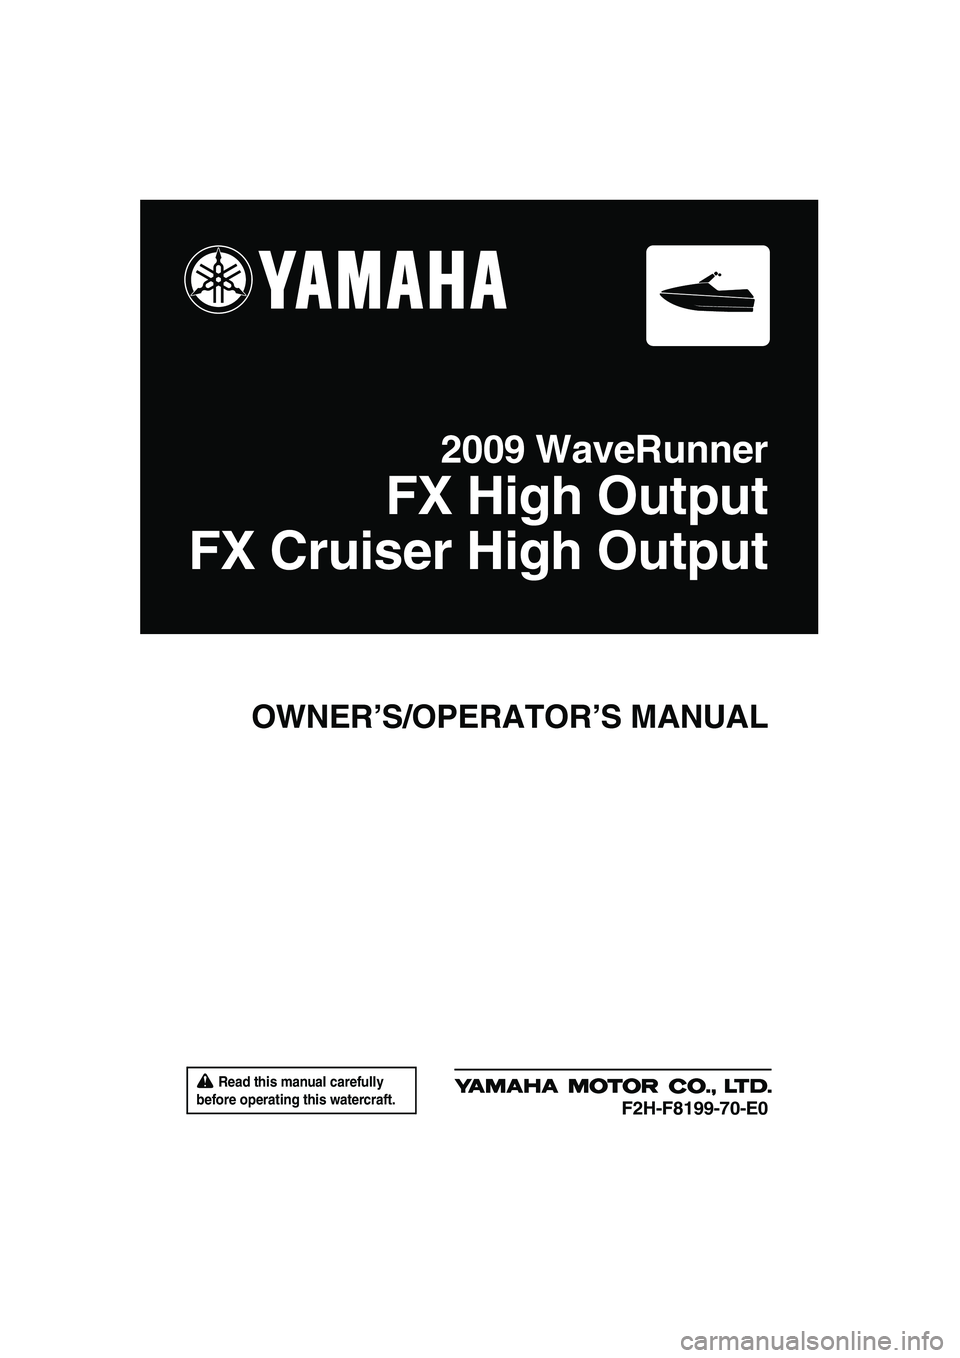 YAMAHA FX HO CRUISER 2009  Owners Manual  Read this manual carefully 
before operating this watercraft.
OWNER’S/OPERATOR’S MANUAL
2009 WaveRunner
FX High Output
FX Cruiser High Output
F2H-F8199-70-E0
UF2H70E0.book  Page 1  Thursday, Janu